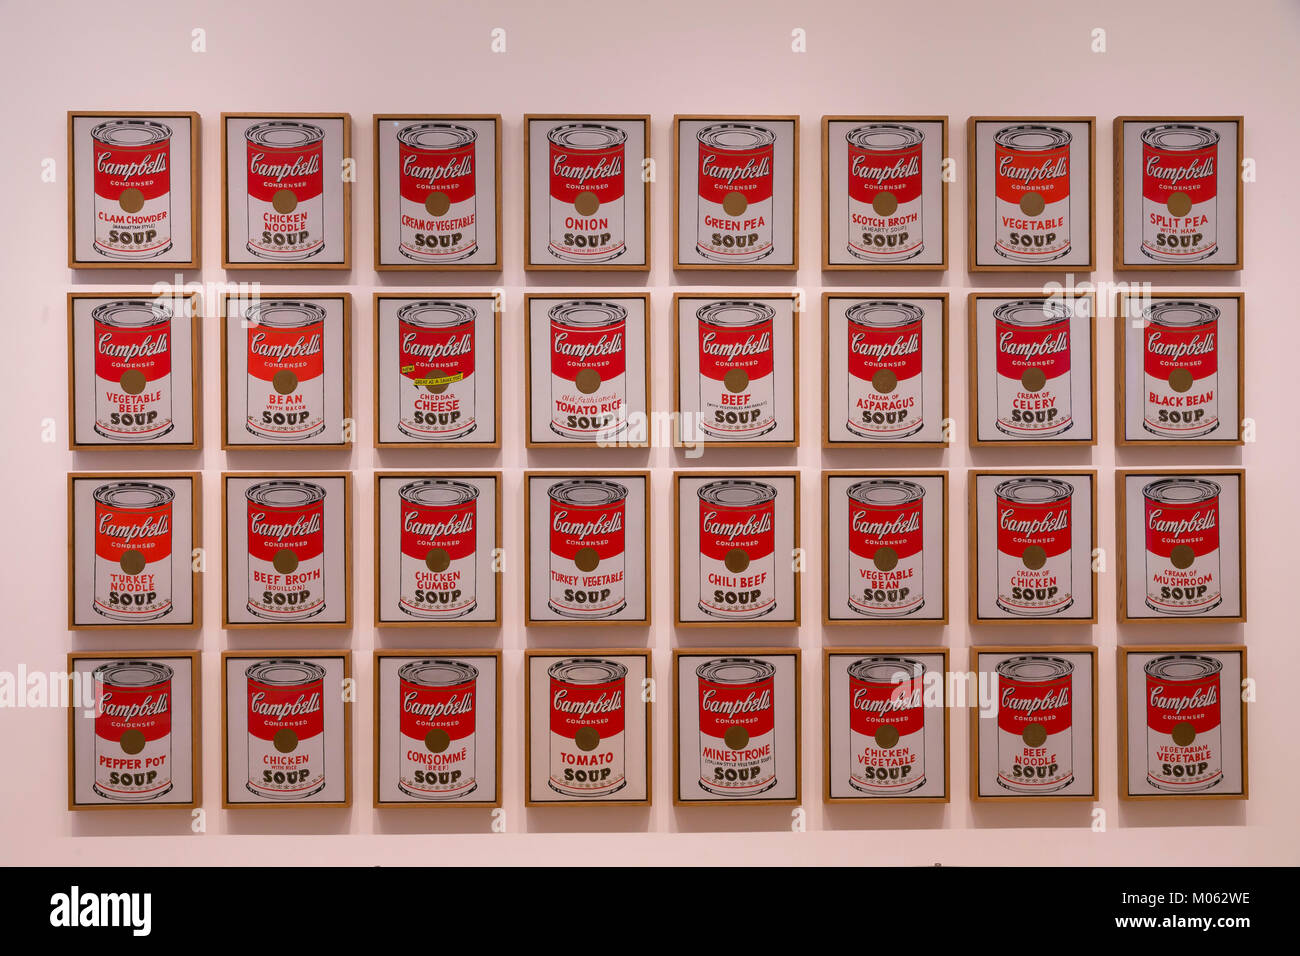 Campbell's Soup Cans, Andy Warhol, 1962, Stock Photo